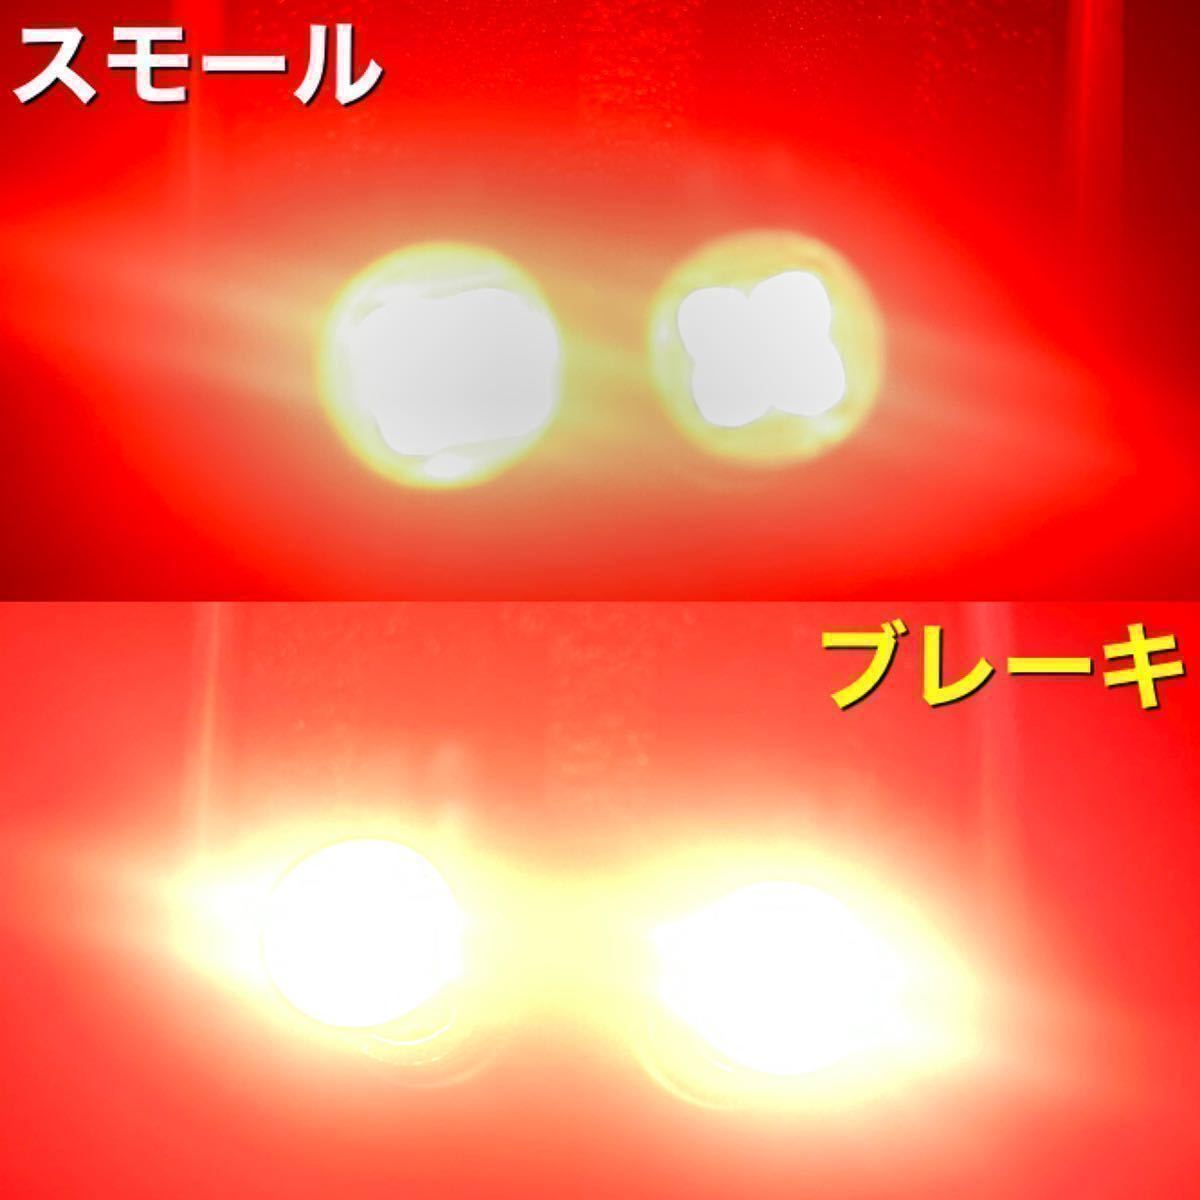 led S25 段違い　ダブルソケット　3030 12smd canbus エラーキャンセラー付き　高輝度 超爆裂　赤　RED 2個　カスタマイズソケット_画像7